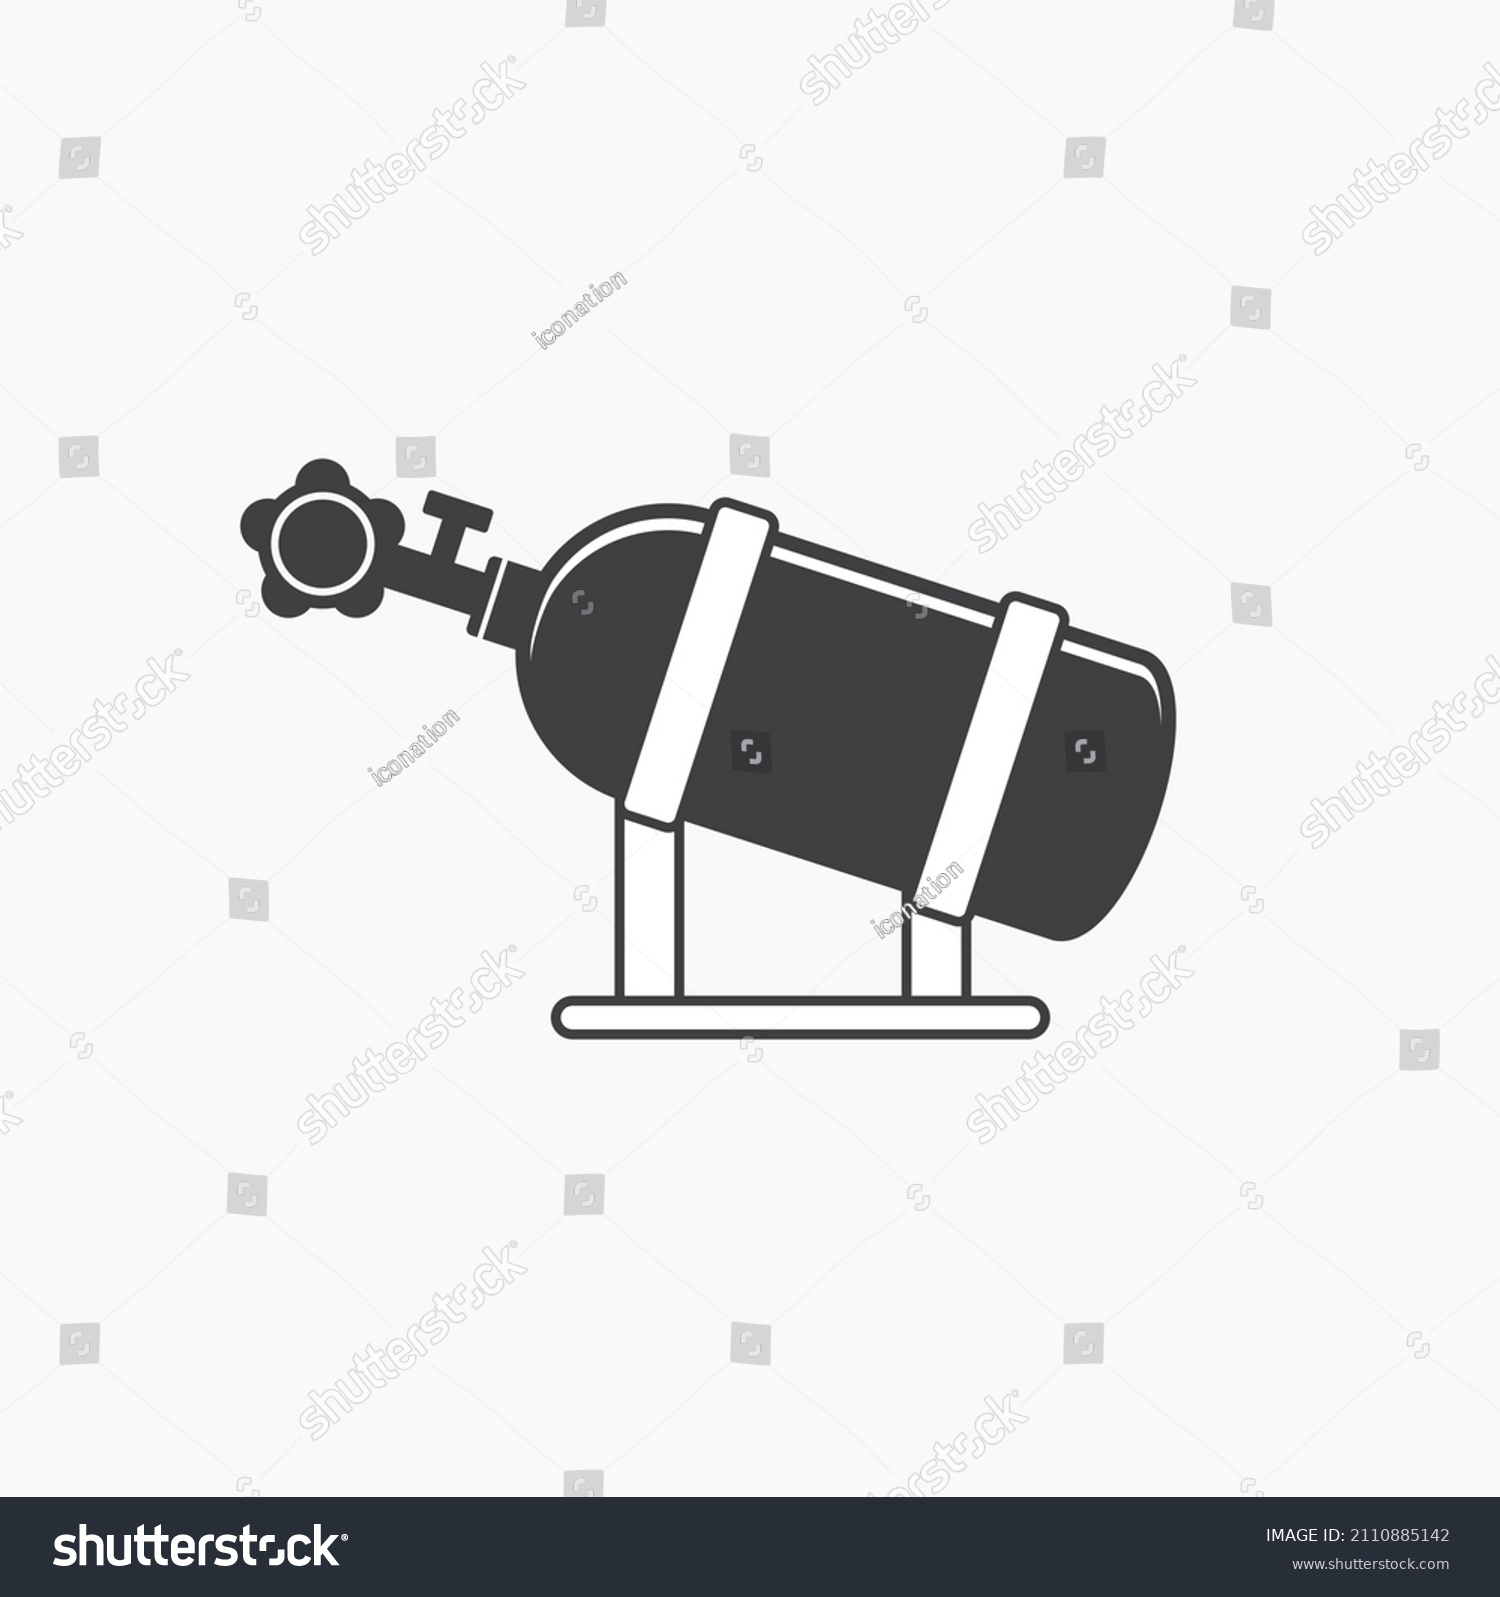 SVG of illustration of nitrous oxide system, auto sport icon, vector art. svg